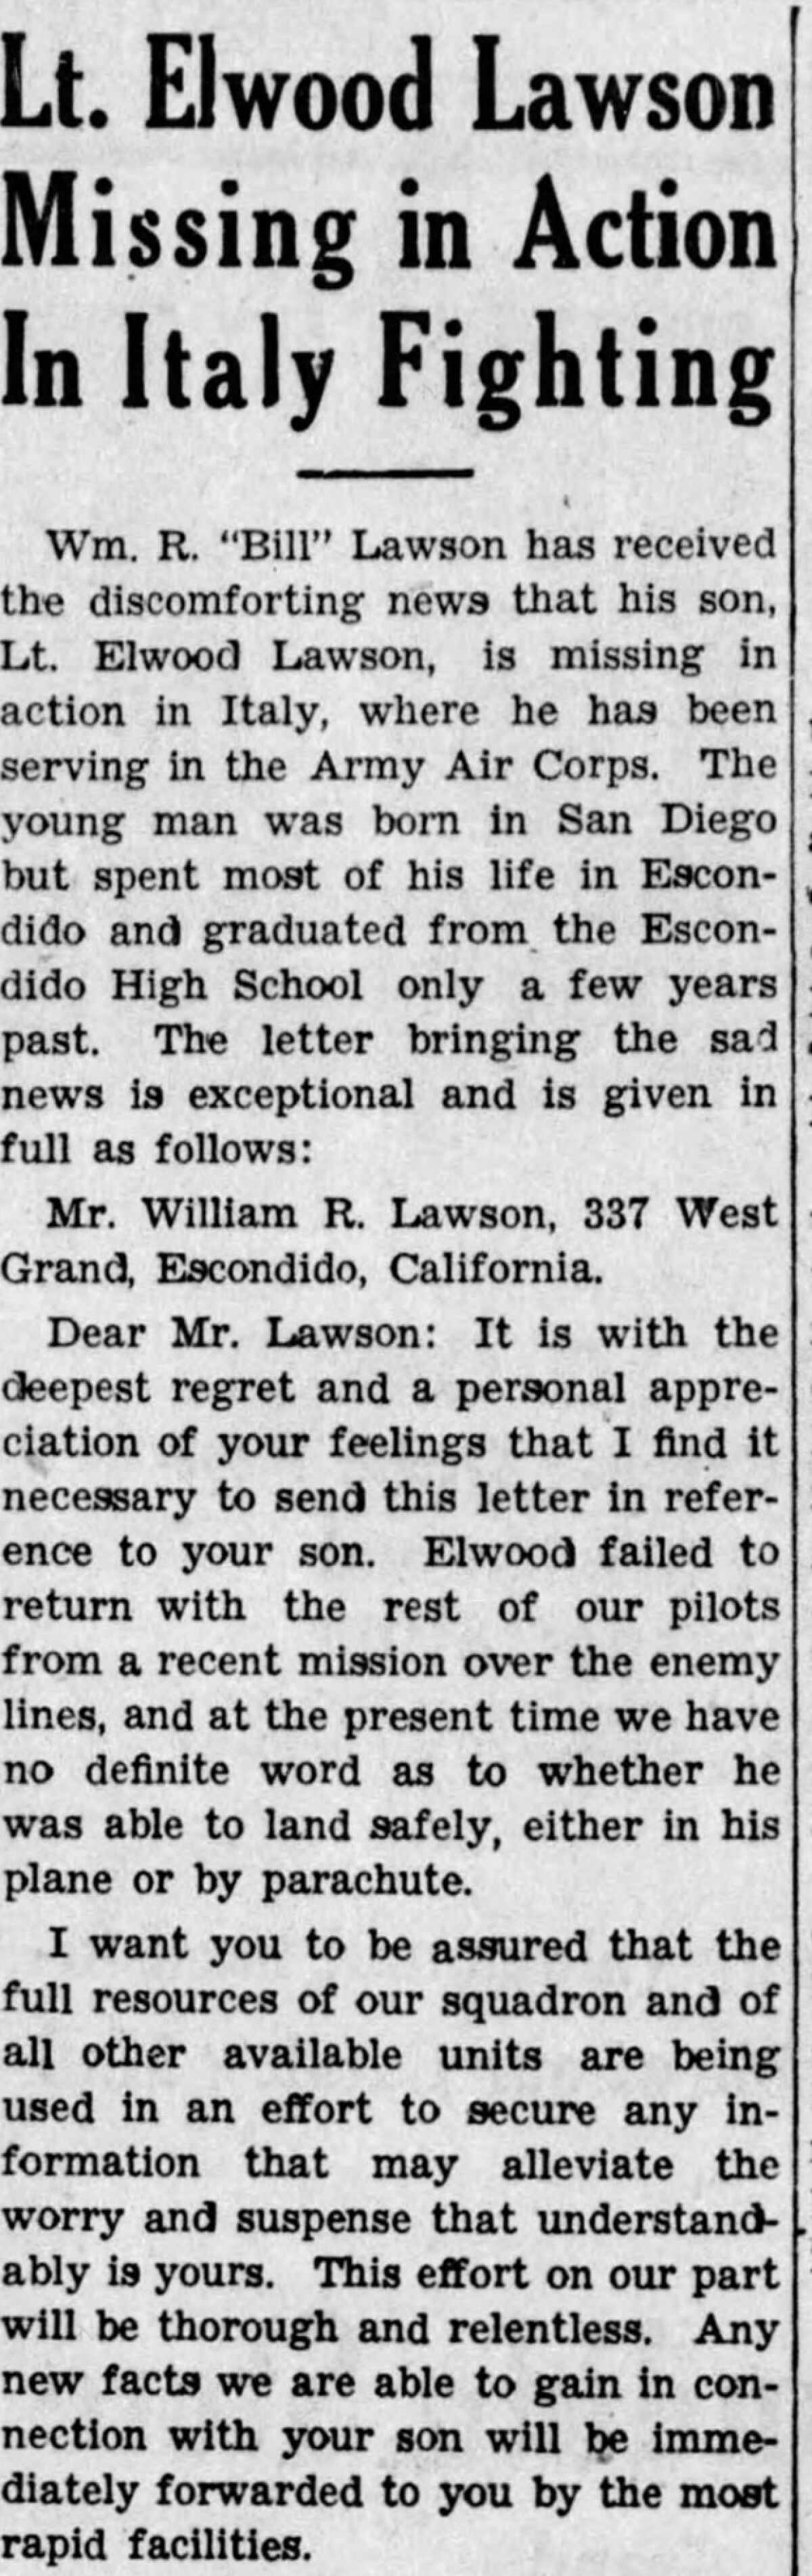 An article published Jan. 15, 1945, in the Times-Advocate newspaper in Escondido about Elwood Lawson's plane going missing.